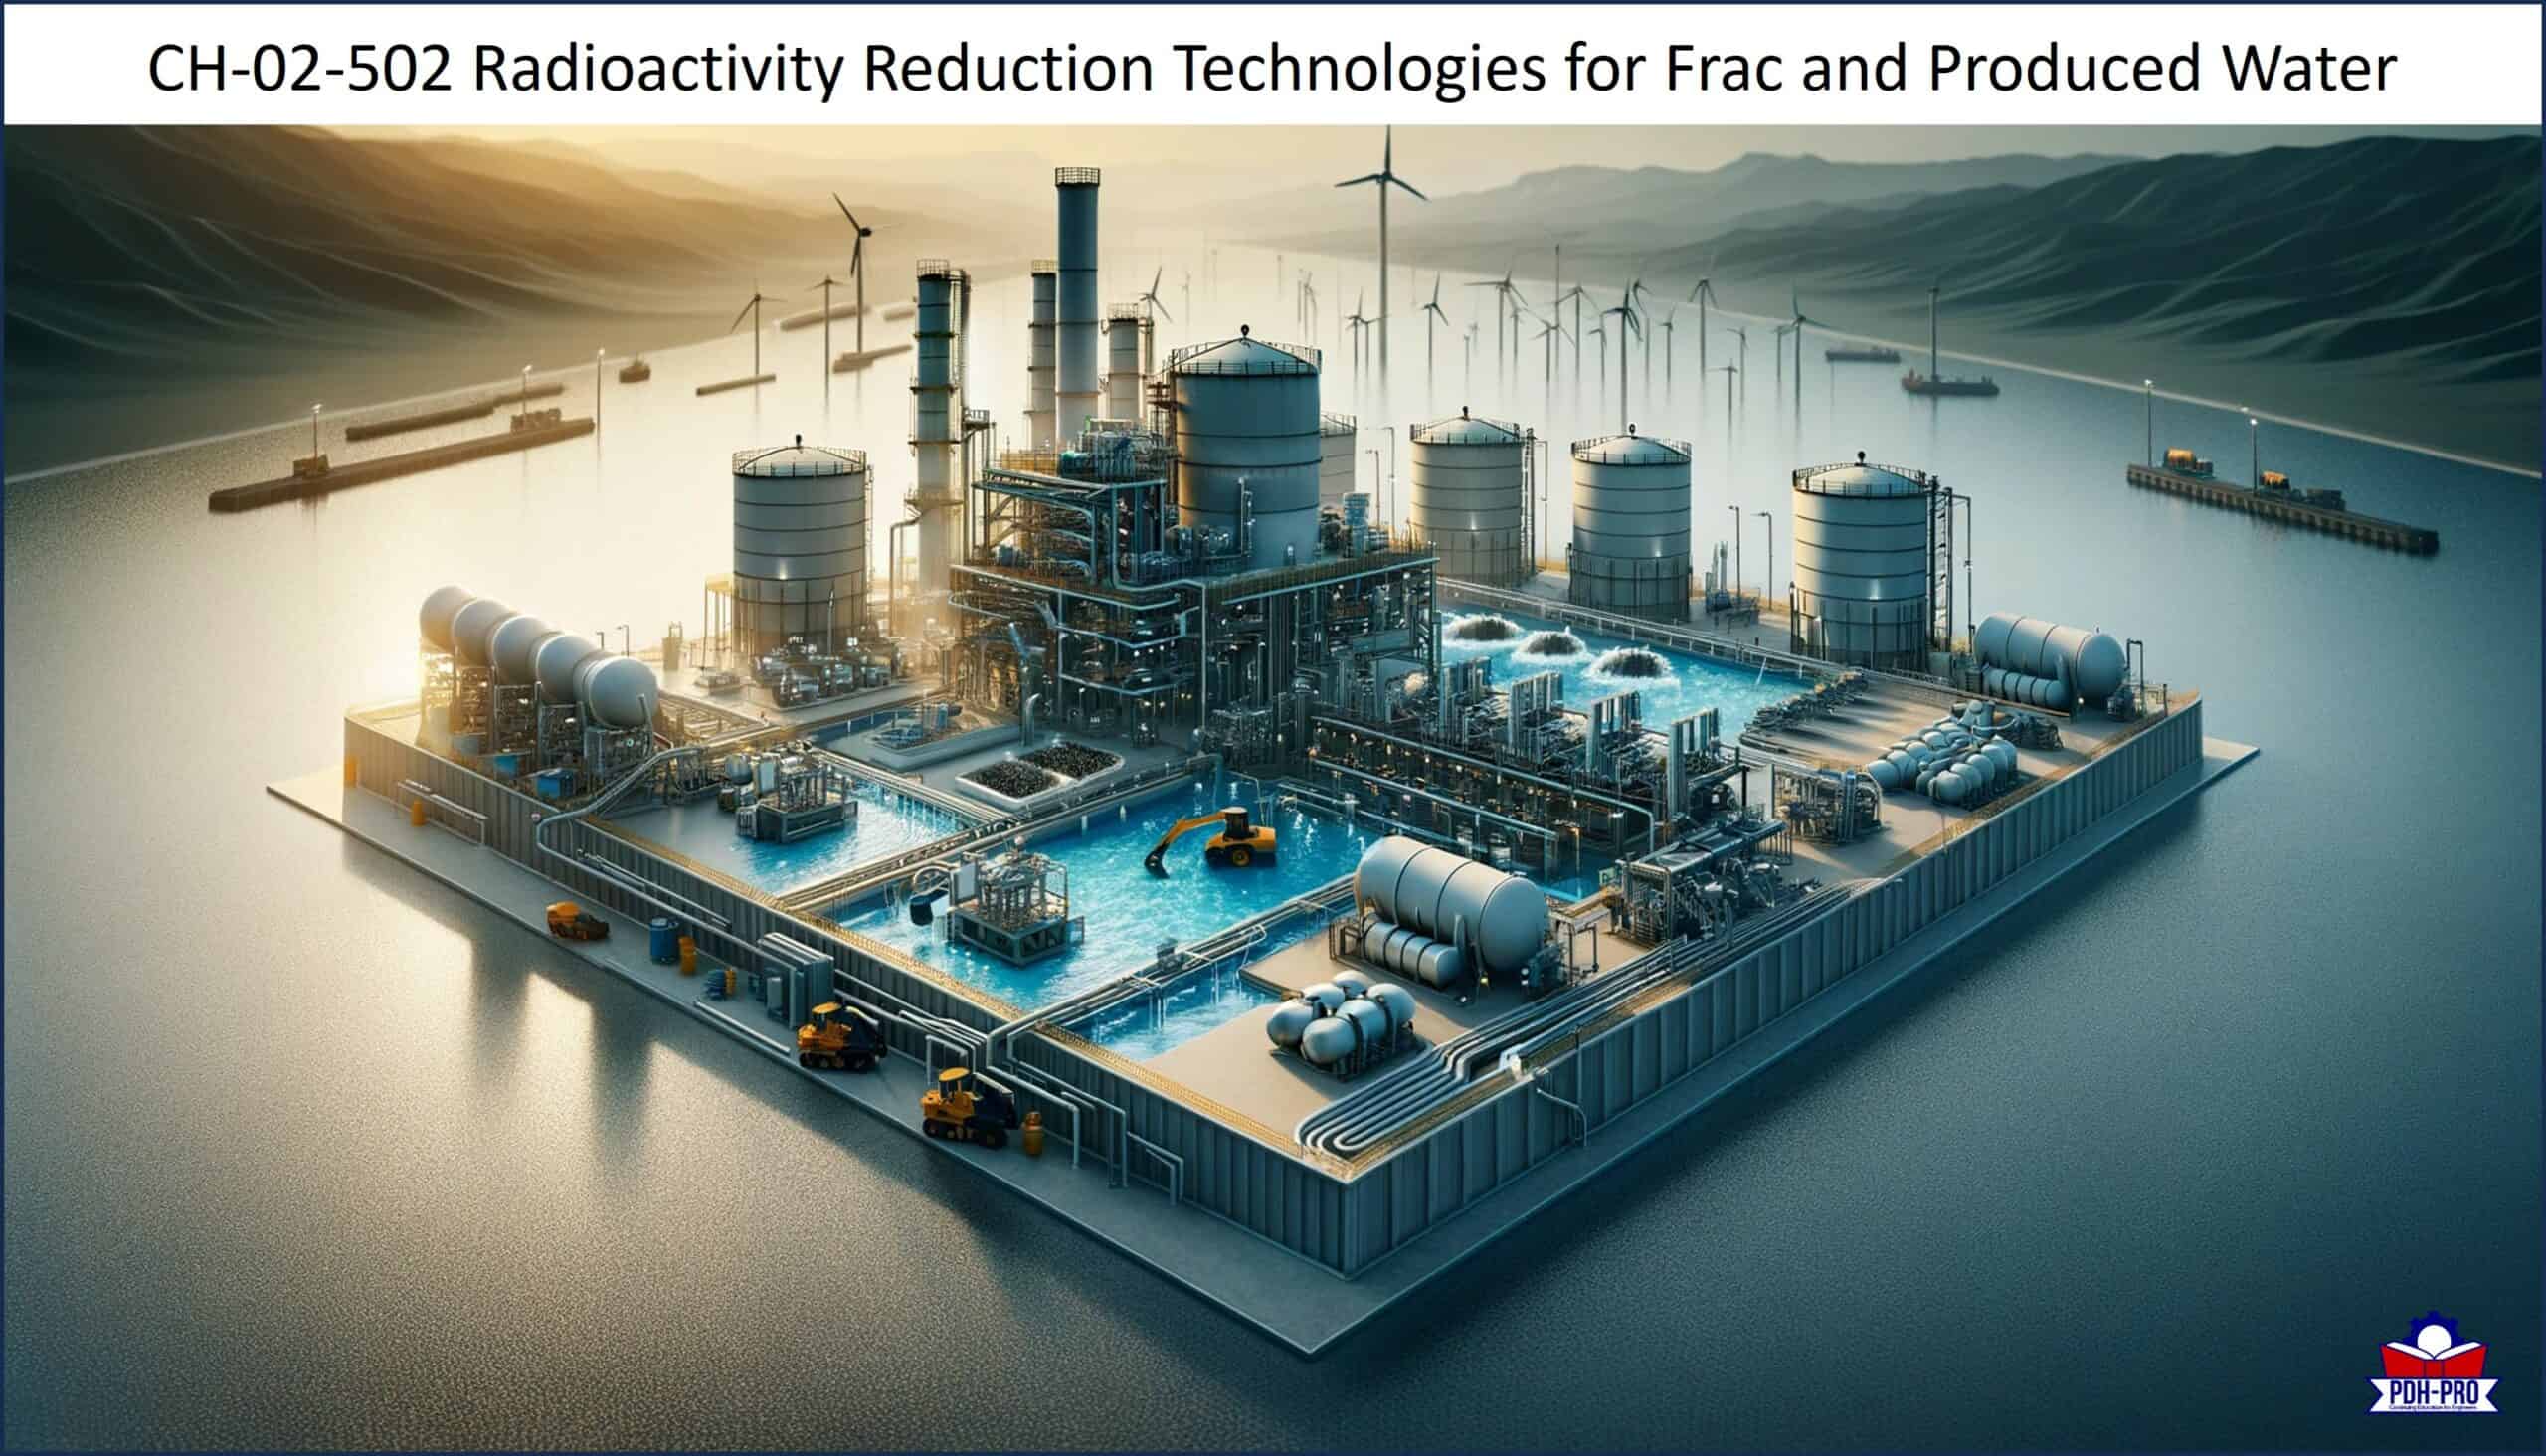 Radioactivity Reduction Technologies for Frac and Produced Water